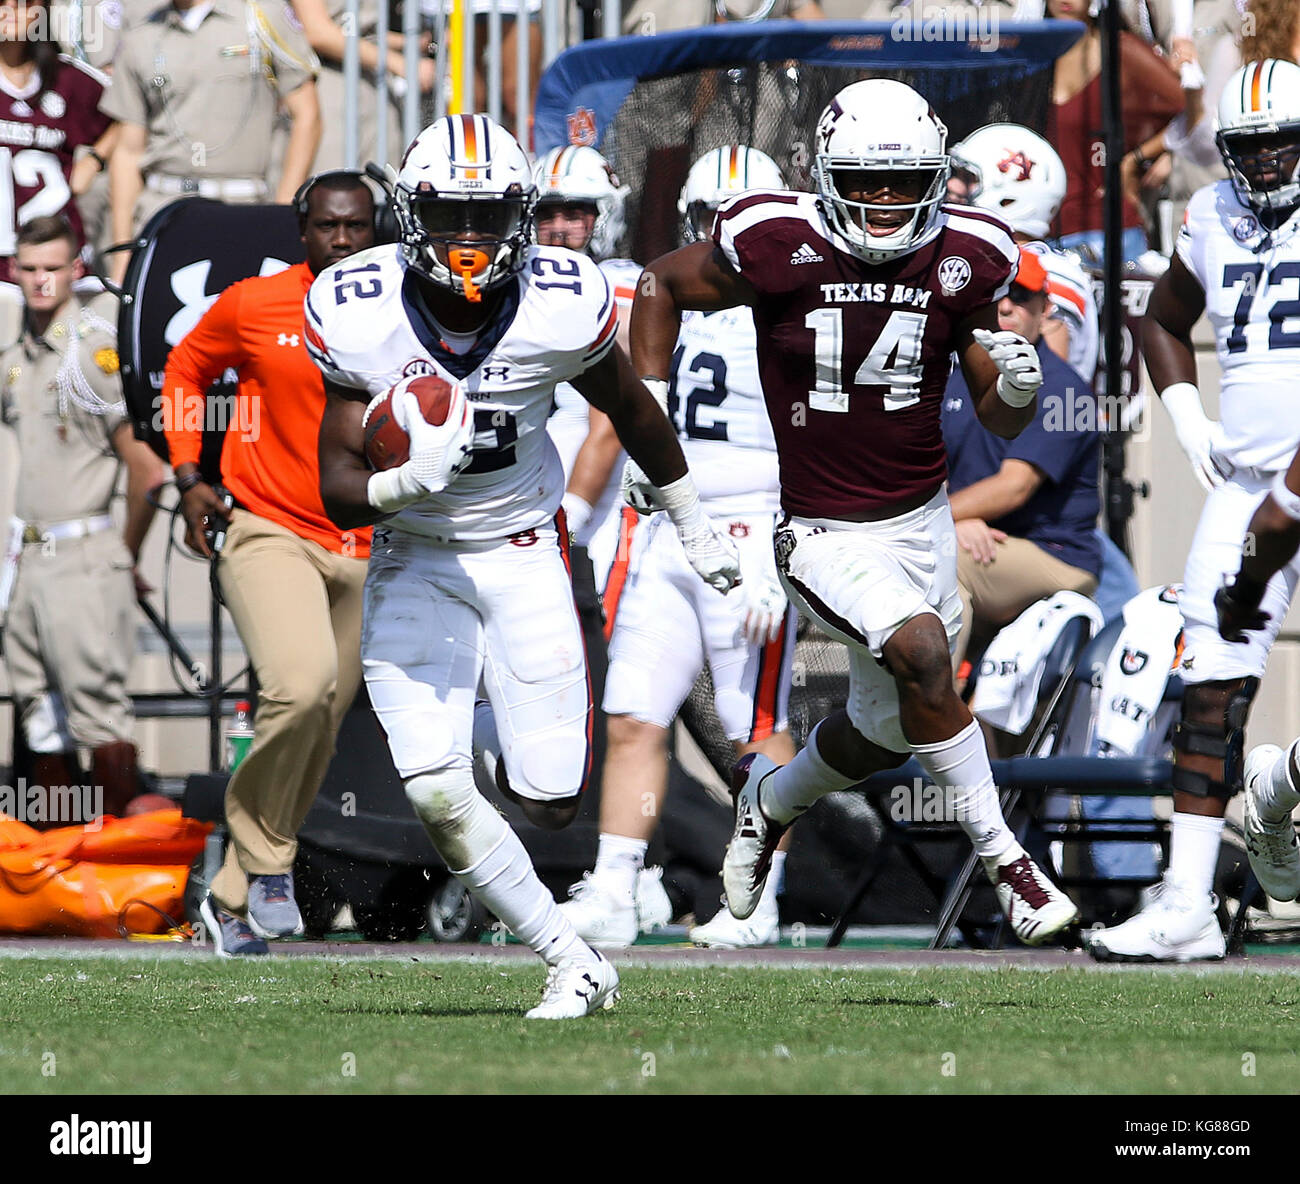 November 4, 2017: Auburn Tigers wide receiver Eli Stove (12) rushes for yards in the third quarter during the NCAA football game between the Auburn Tigers and the Texas A&M Aggies at Kyle Field in College Station, TX; John Glaser/CSM. Stock Photo